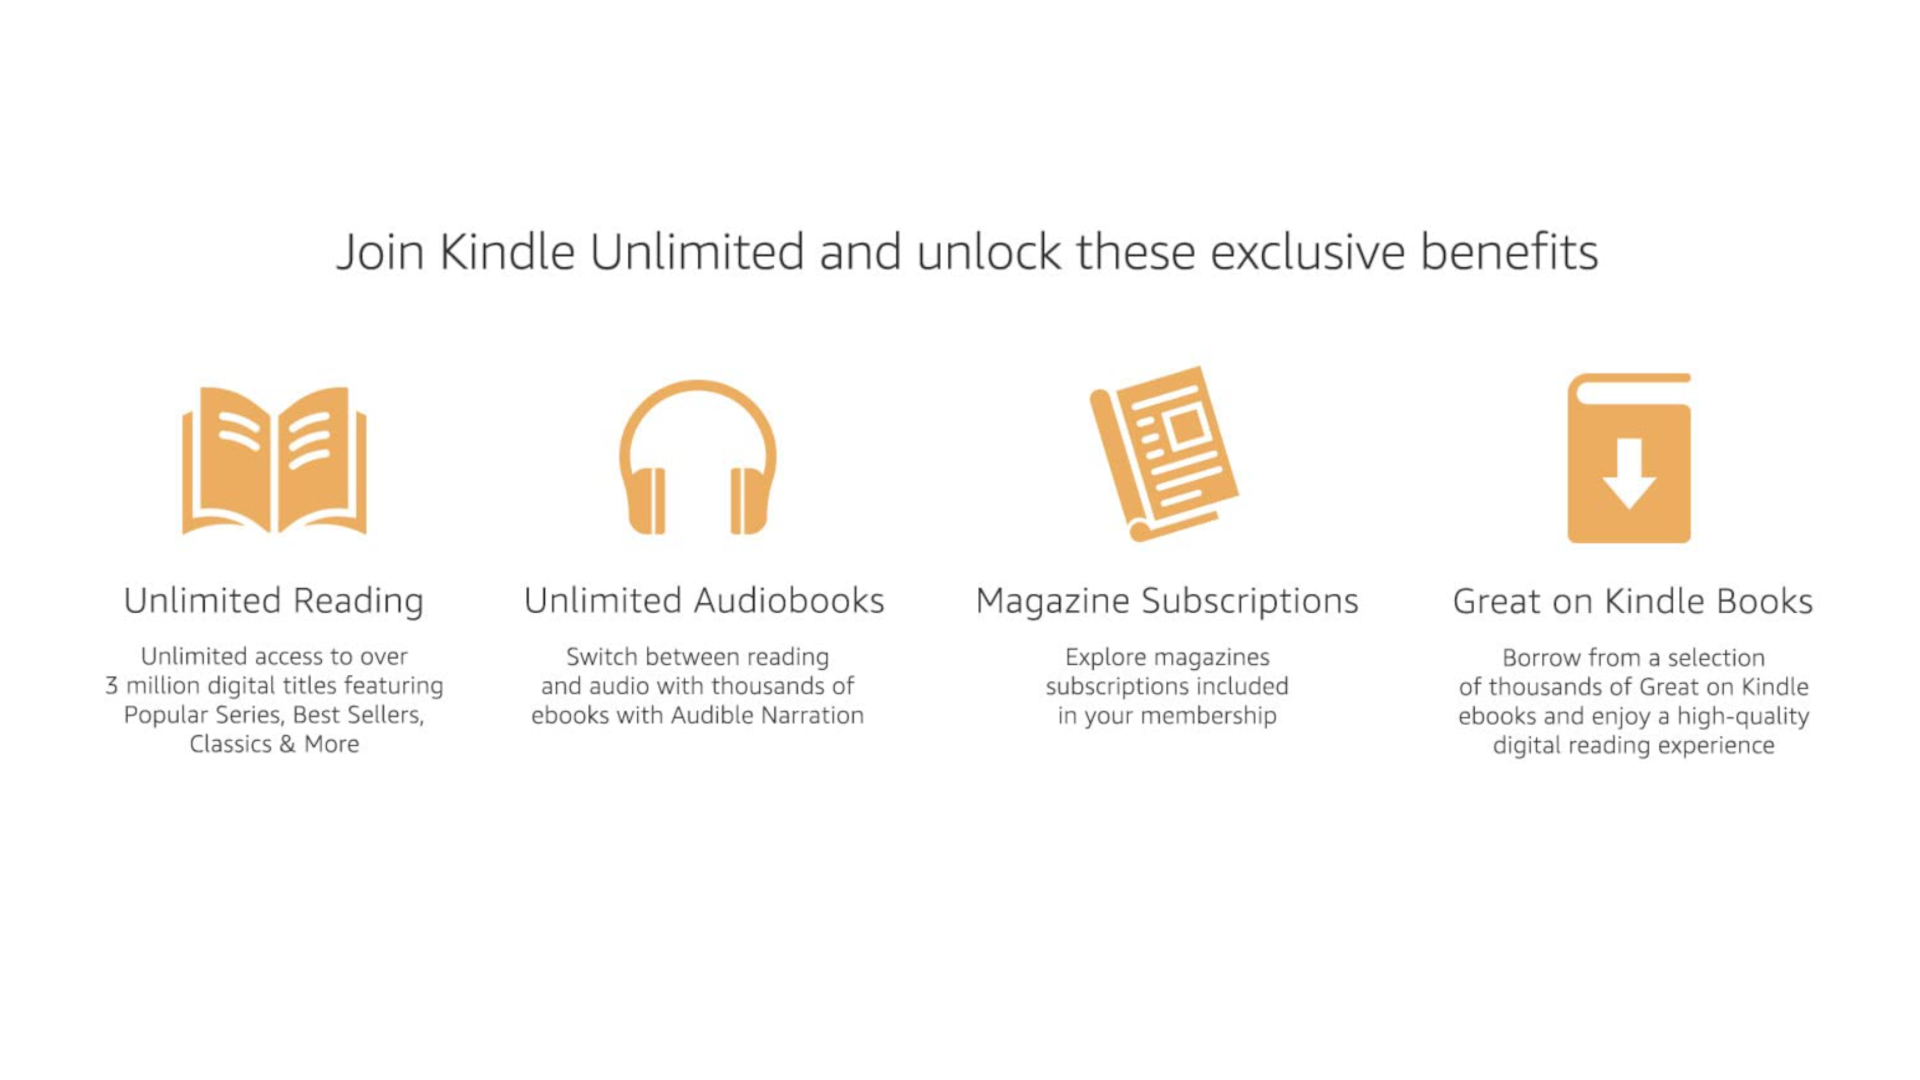 an image shows the benefits of Kindle Unlimited.